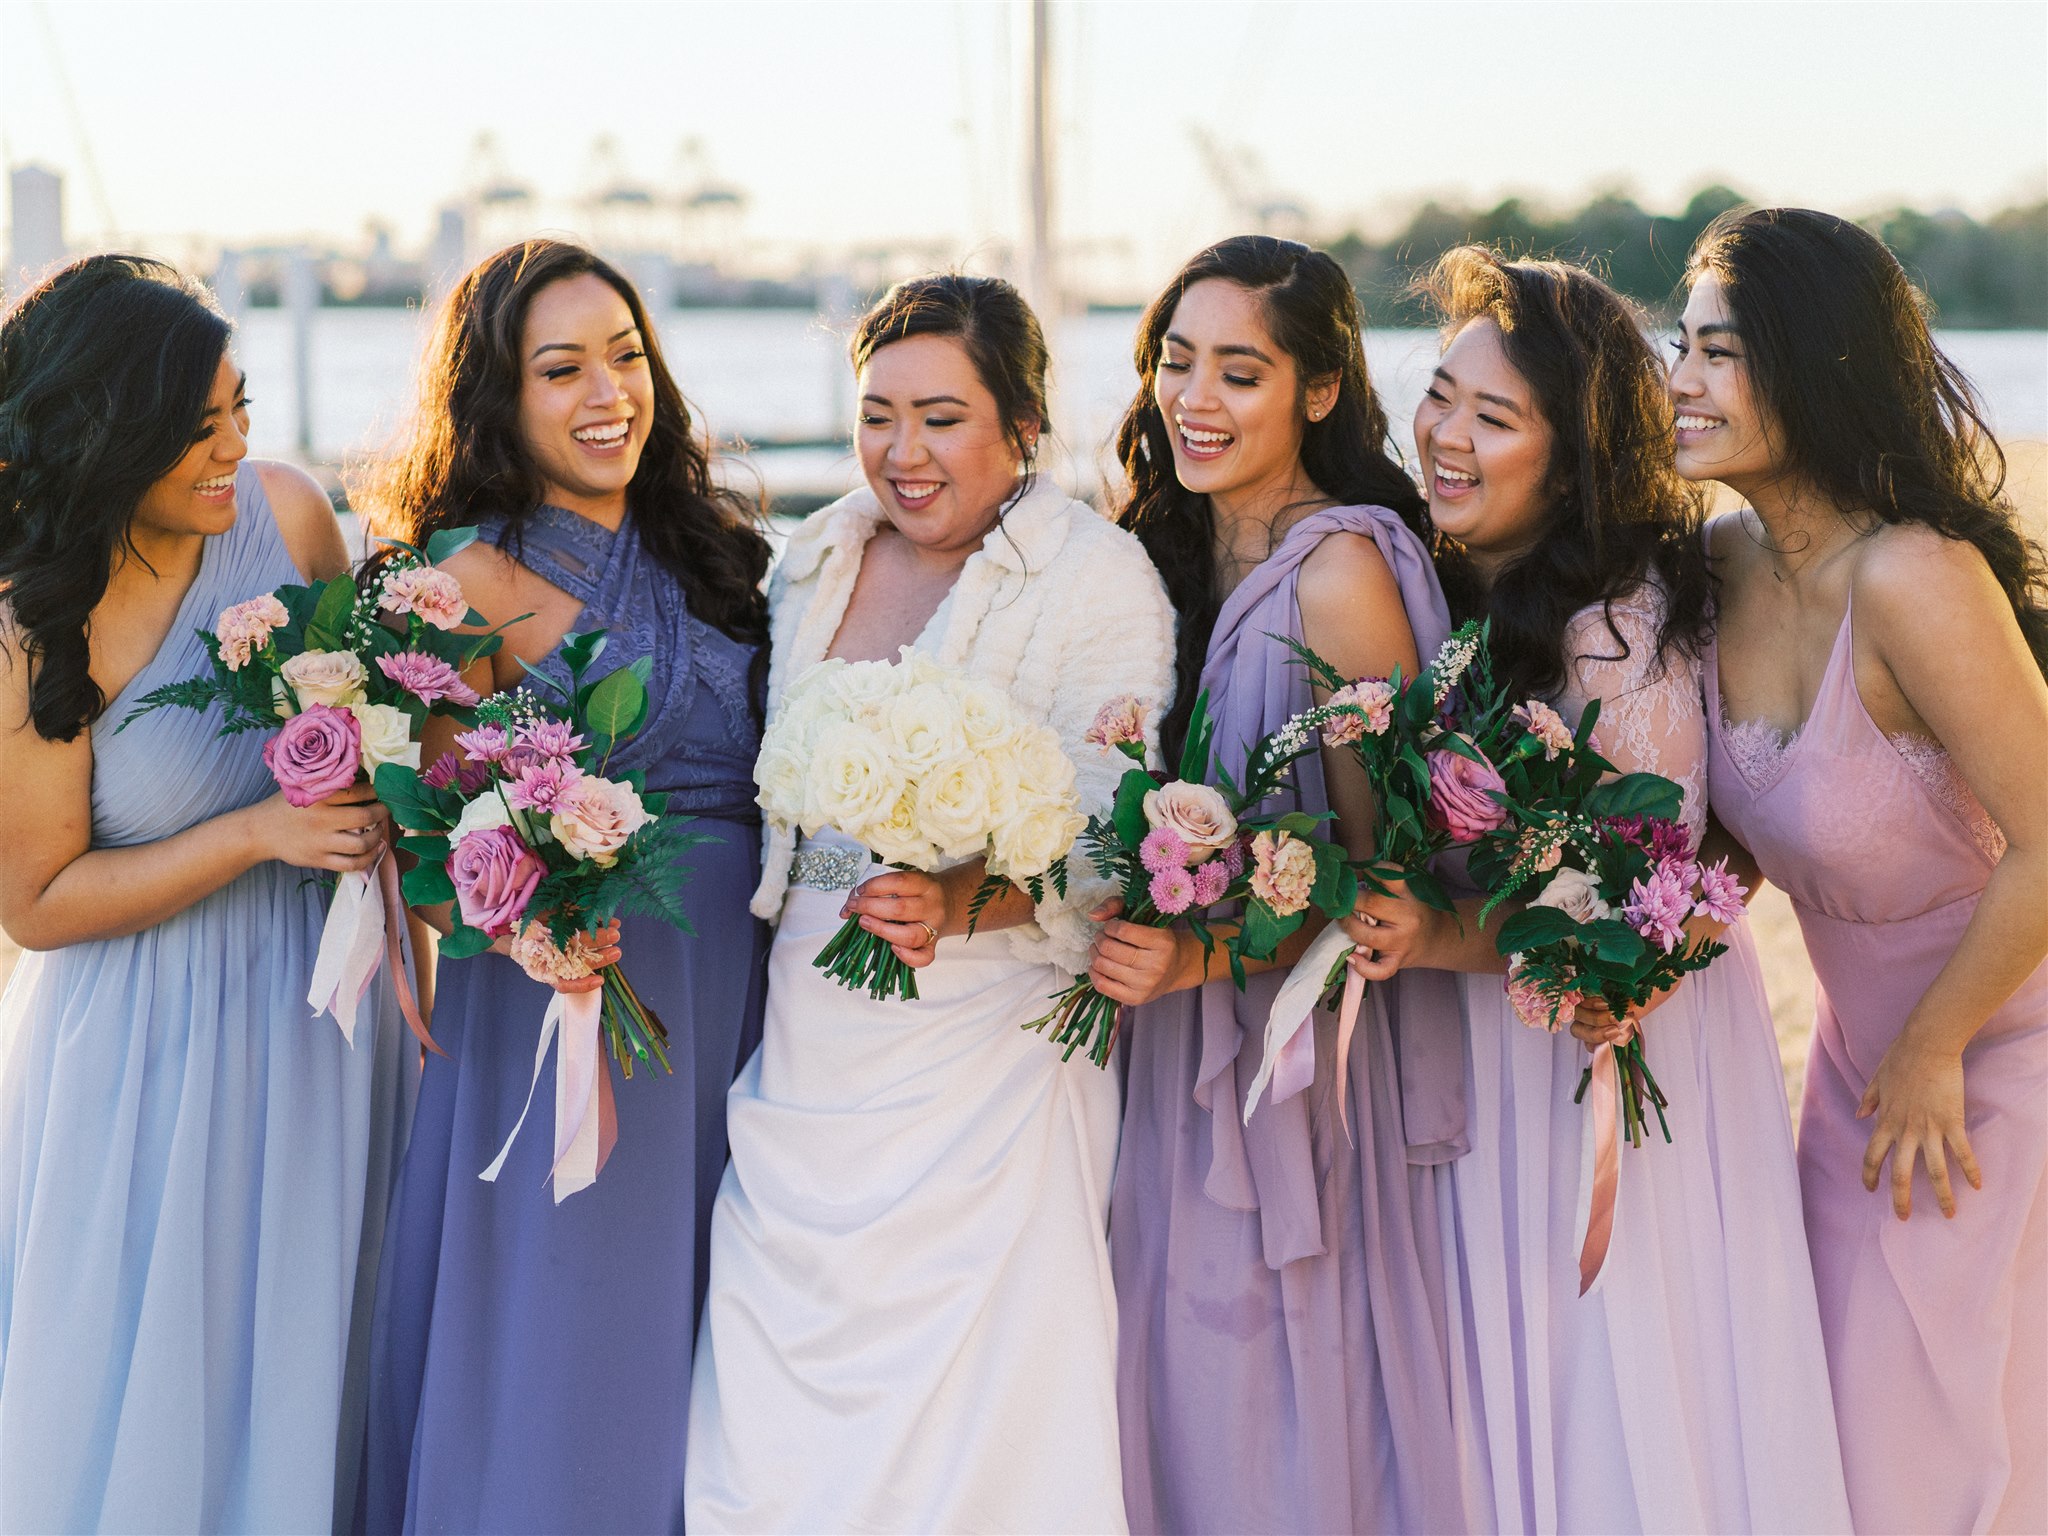 beach portraits of wedding party in mismatched gowns